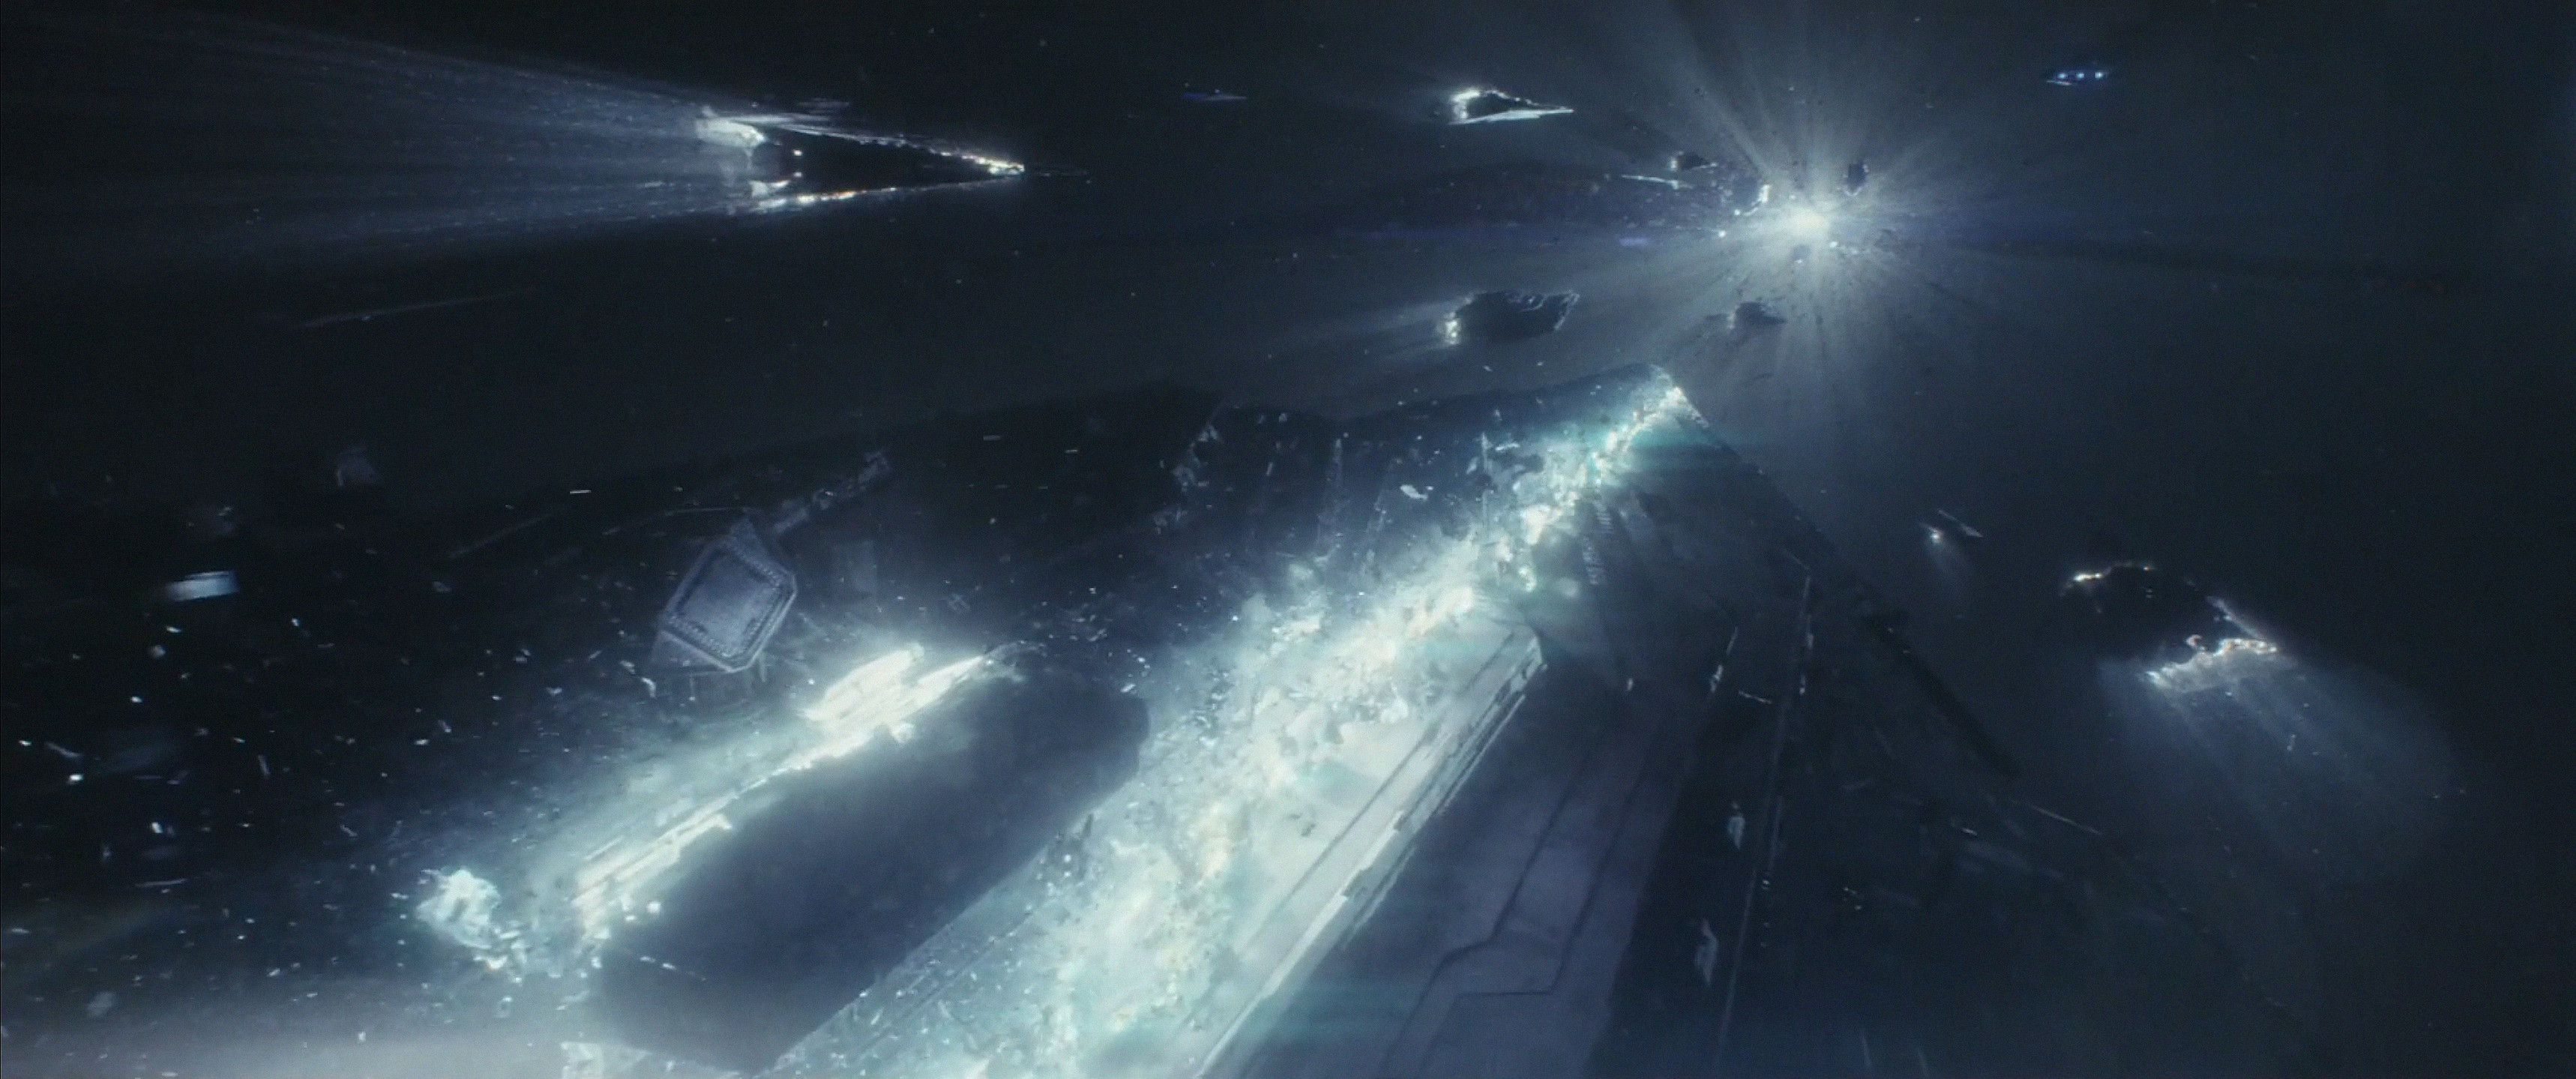 Ripped Star Destroyers and Debris